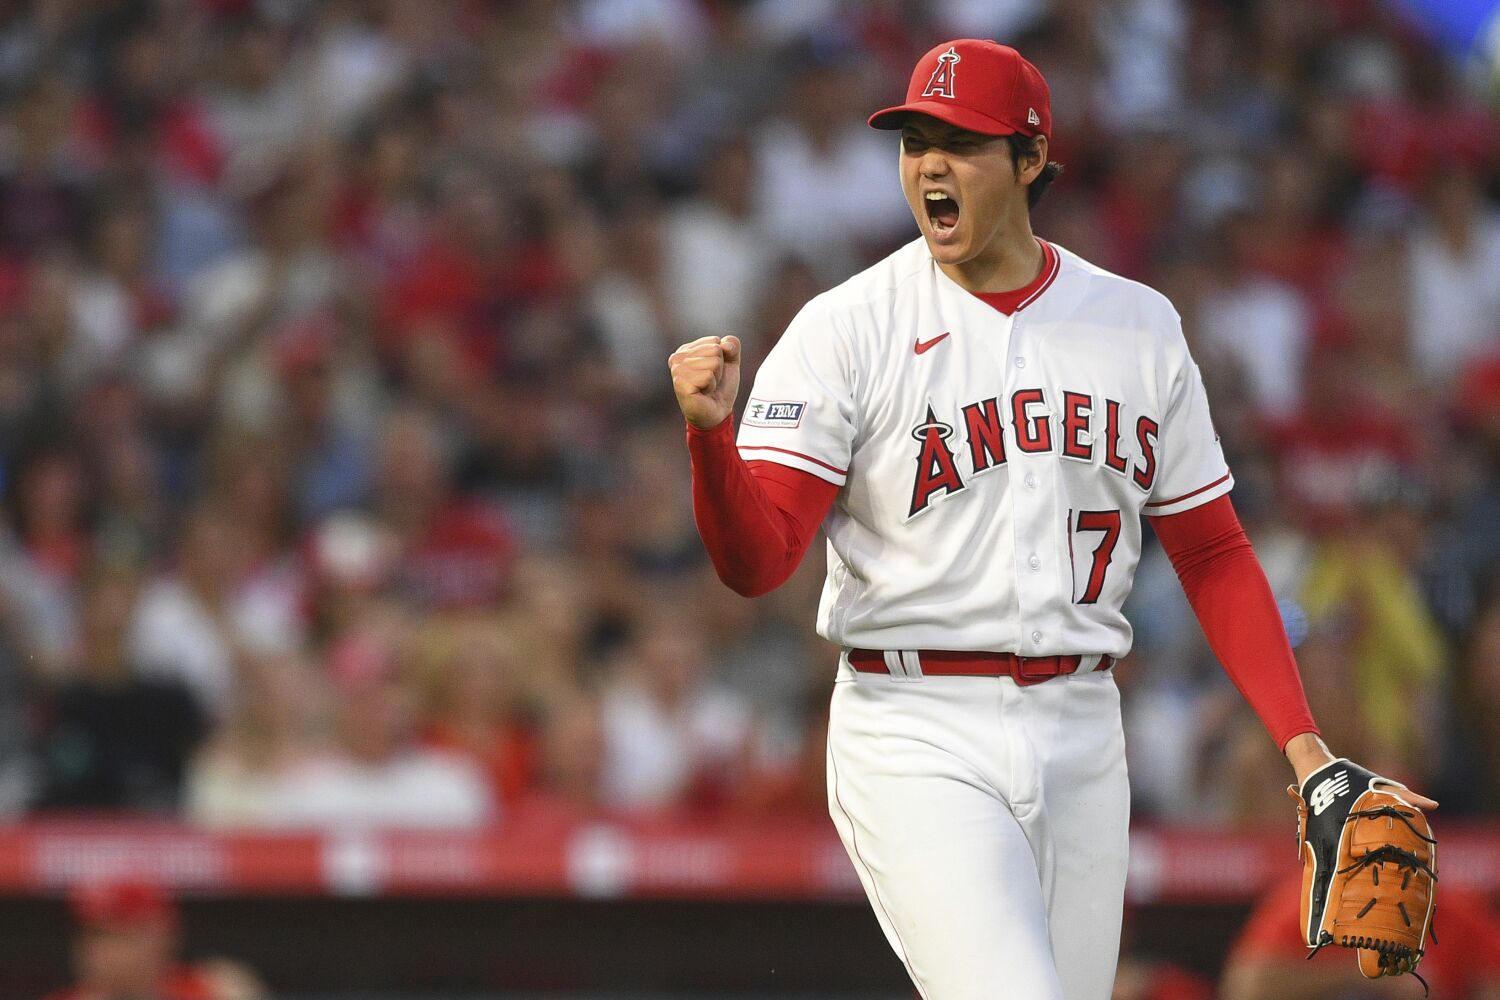 Shohei Ohtani puts up masterful, 11-strikeout performance in Angels' win